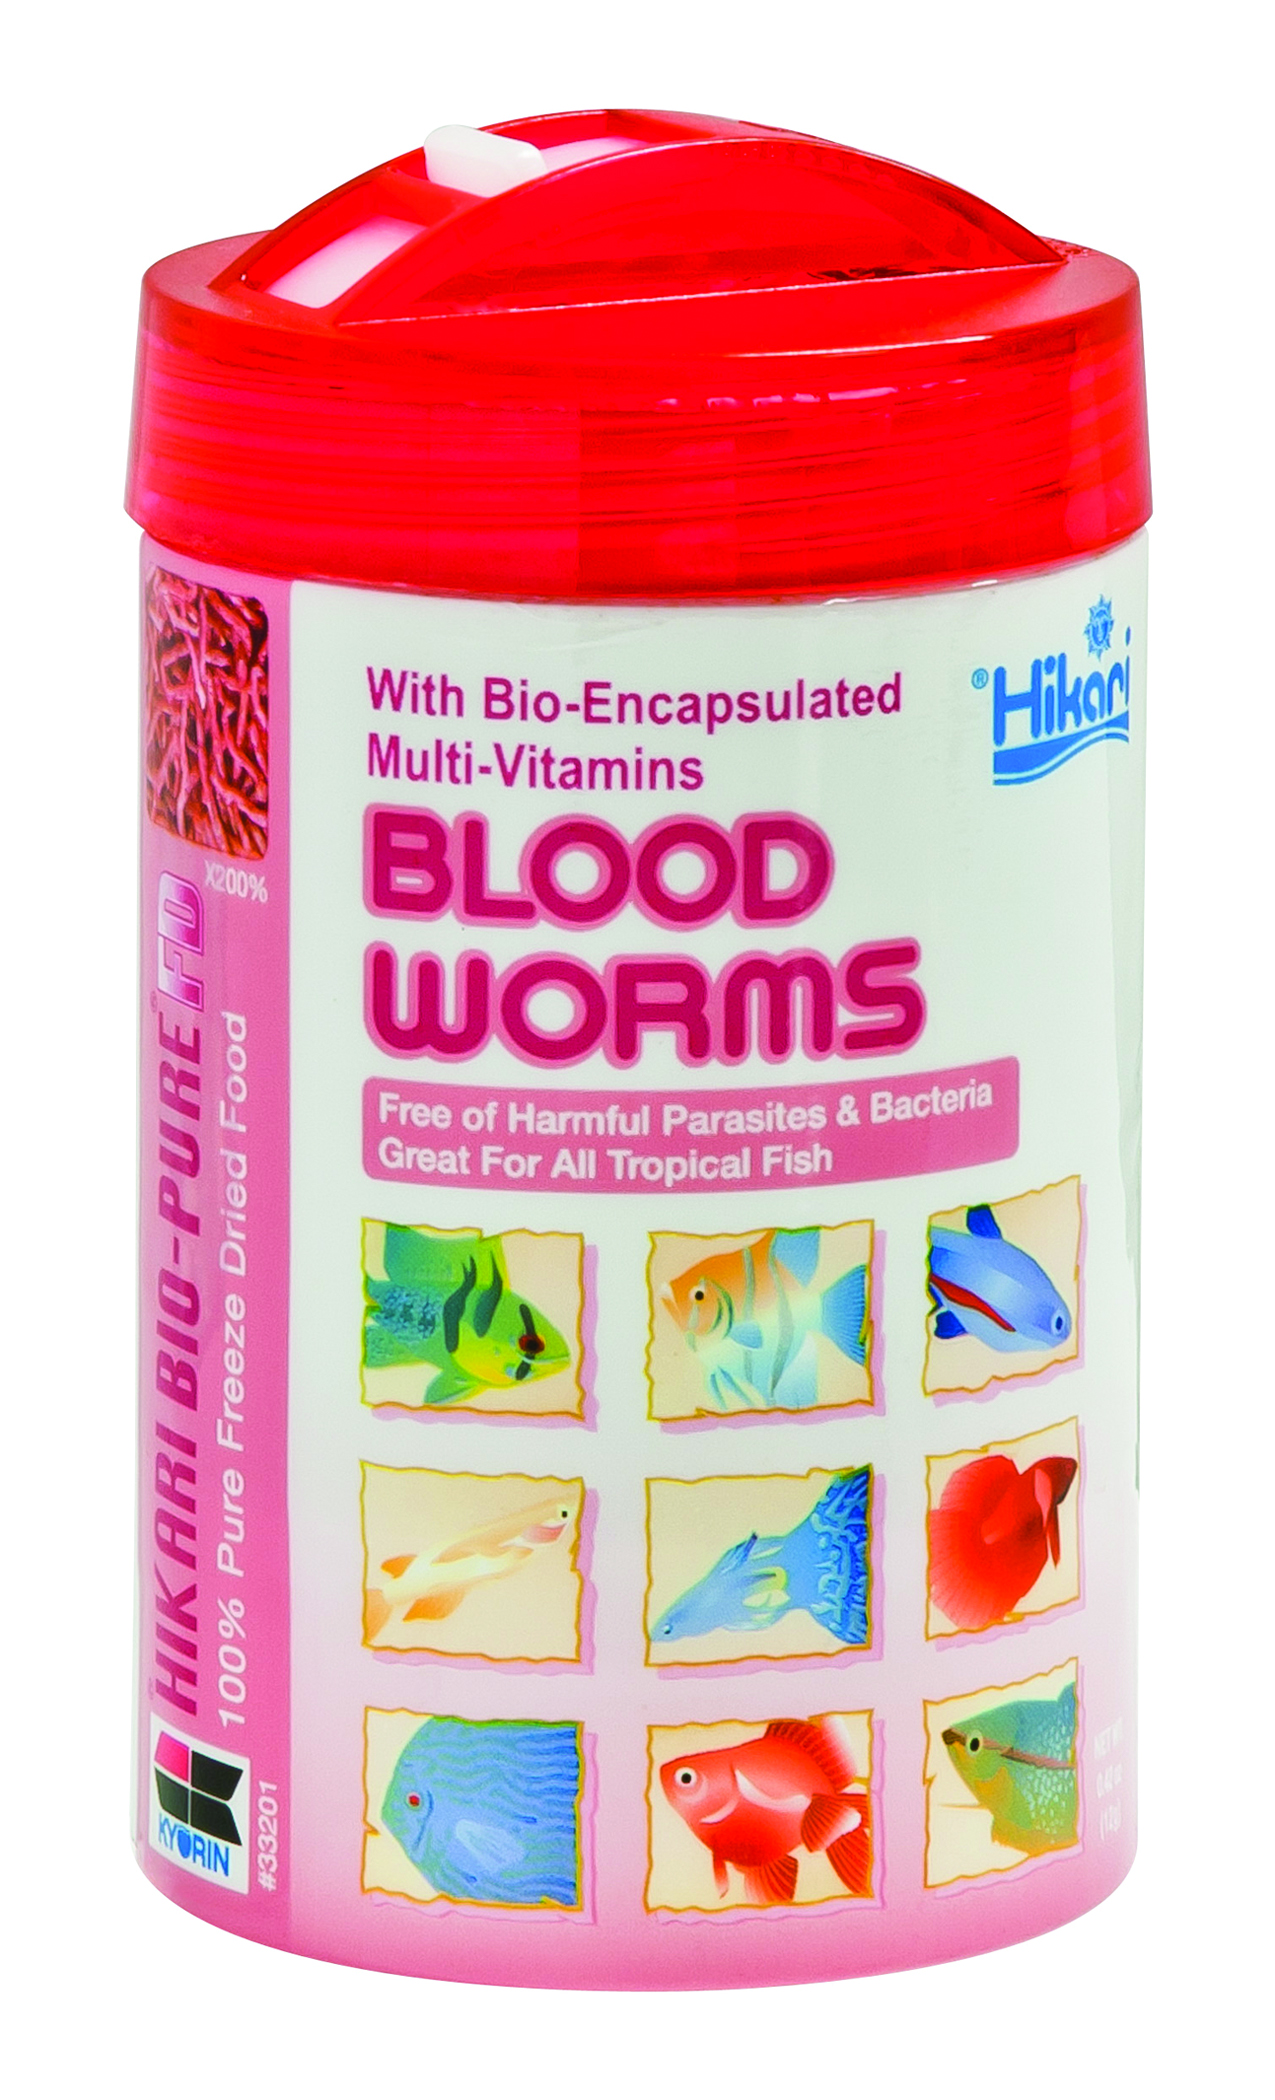 BLOOD WORMS